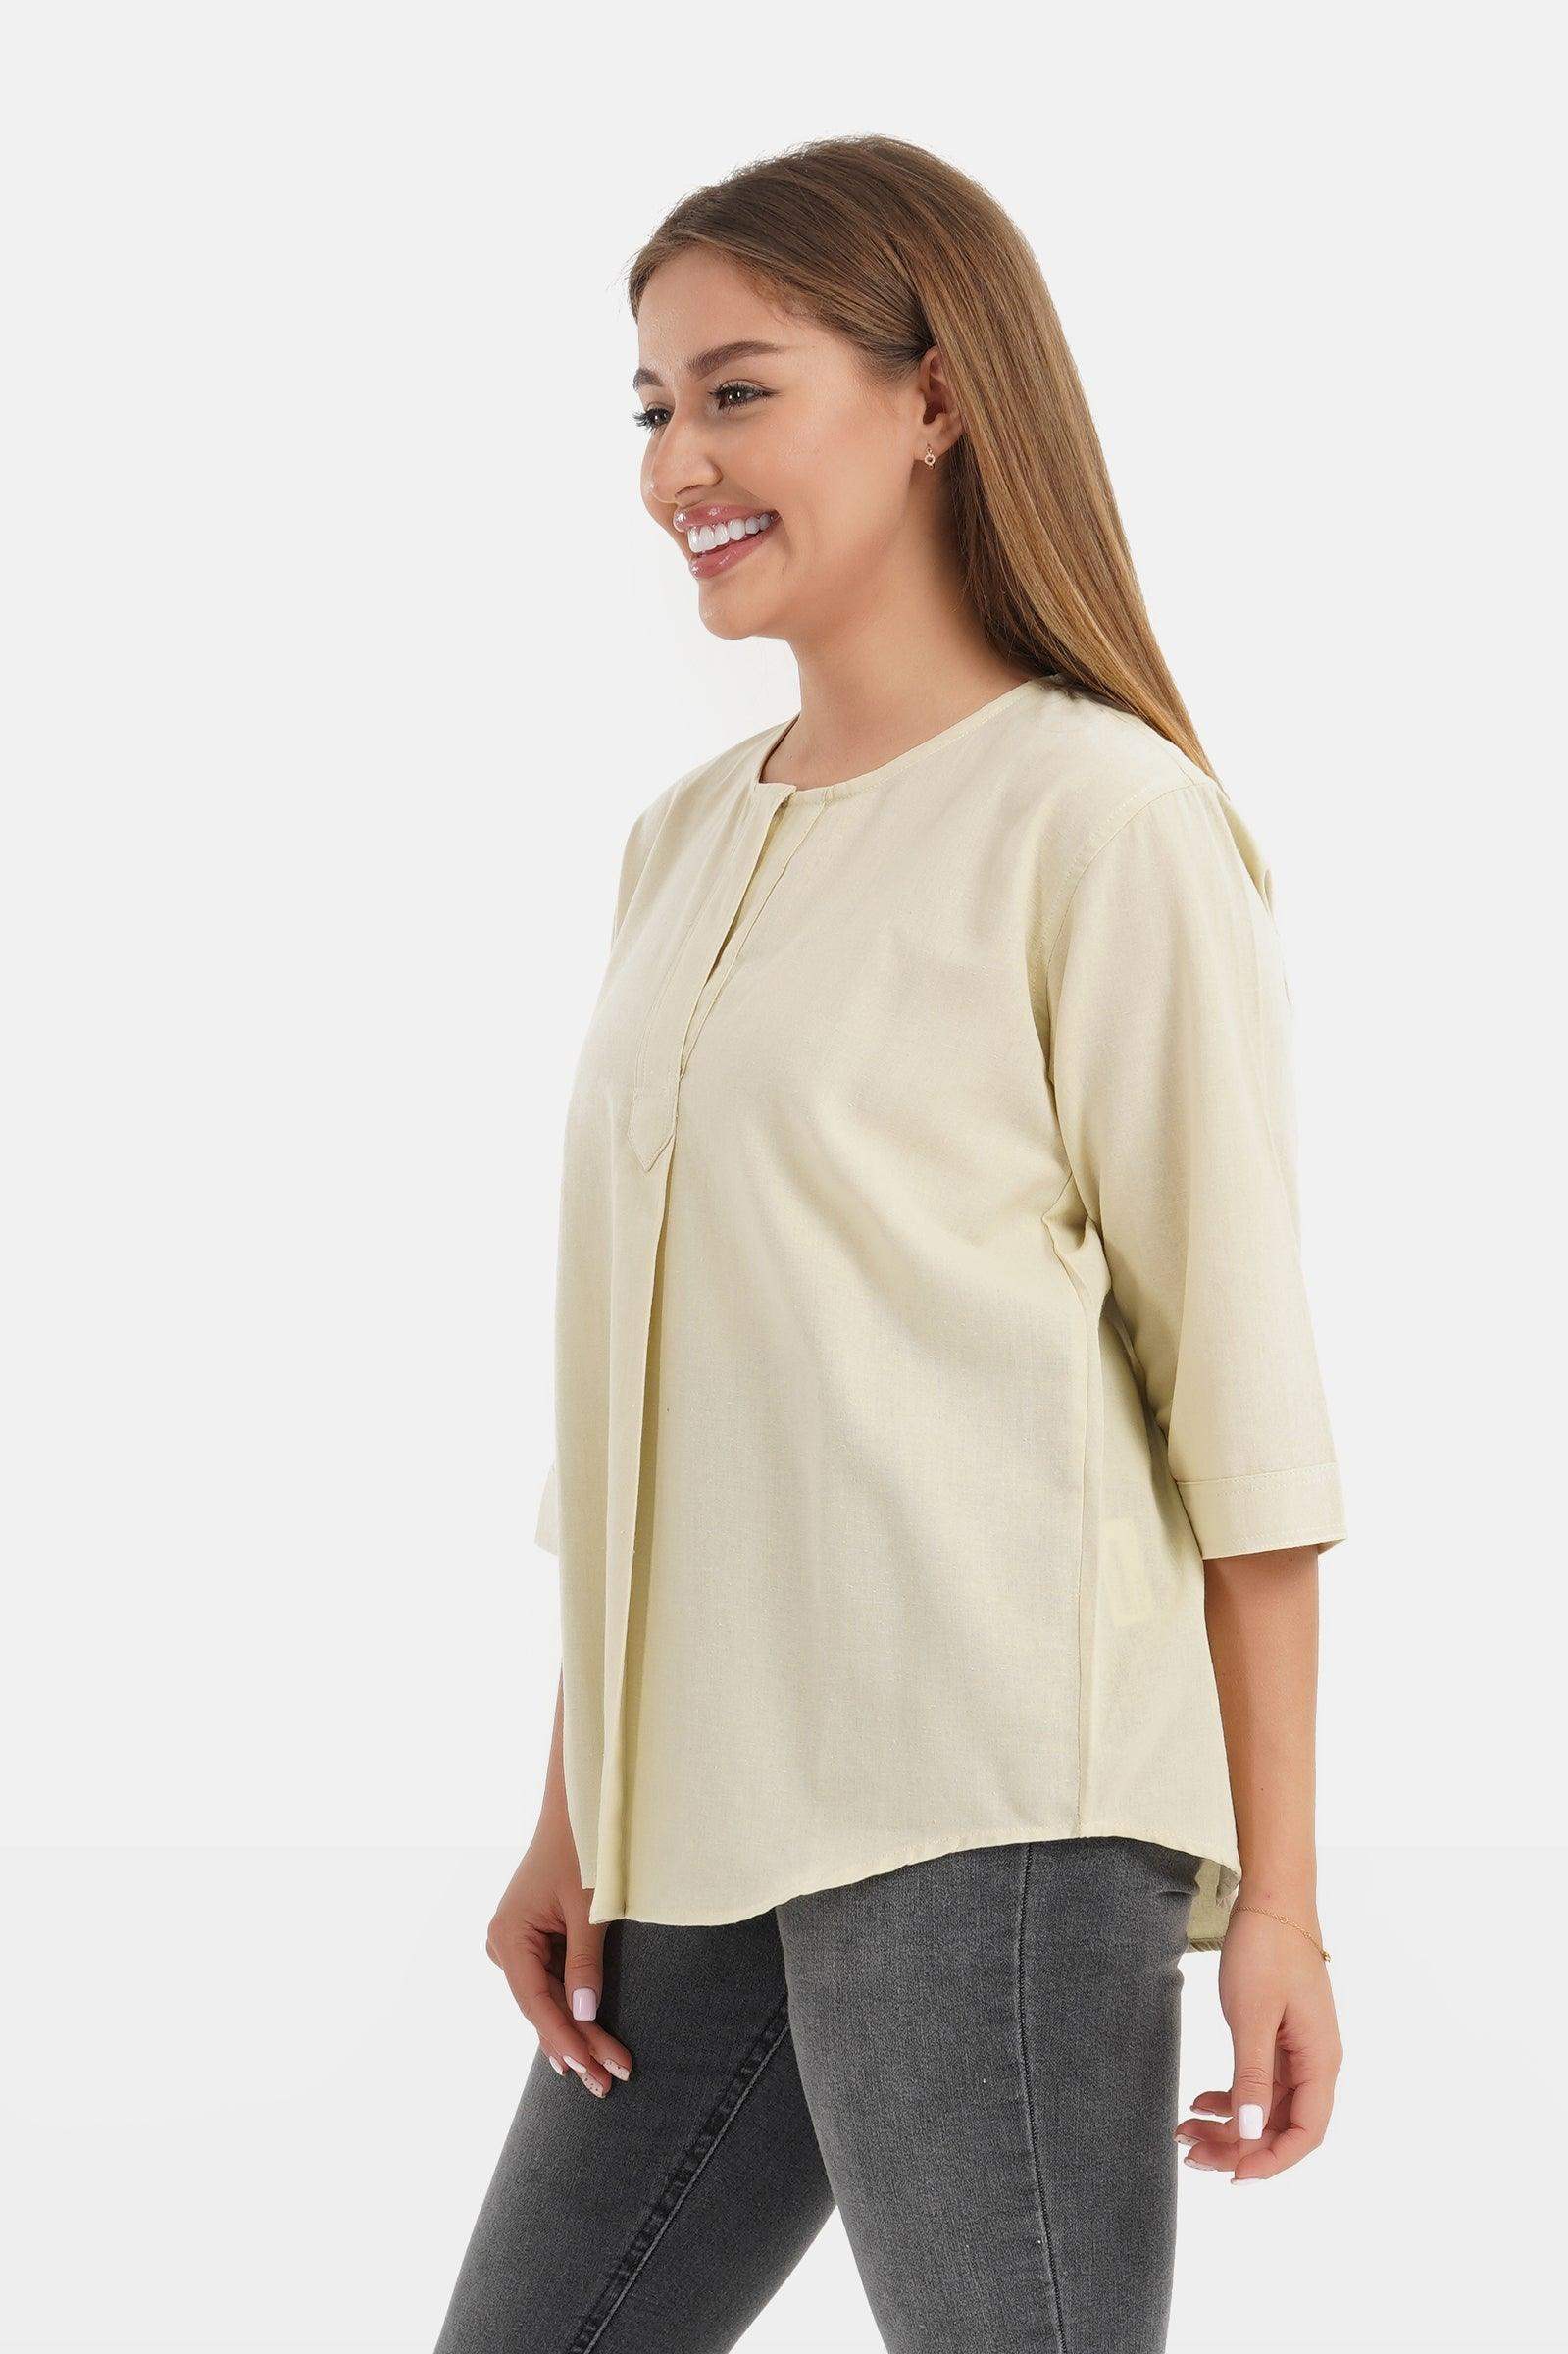 Solid Blouse with 3/4 Sleeves - Carina - كارينا